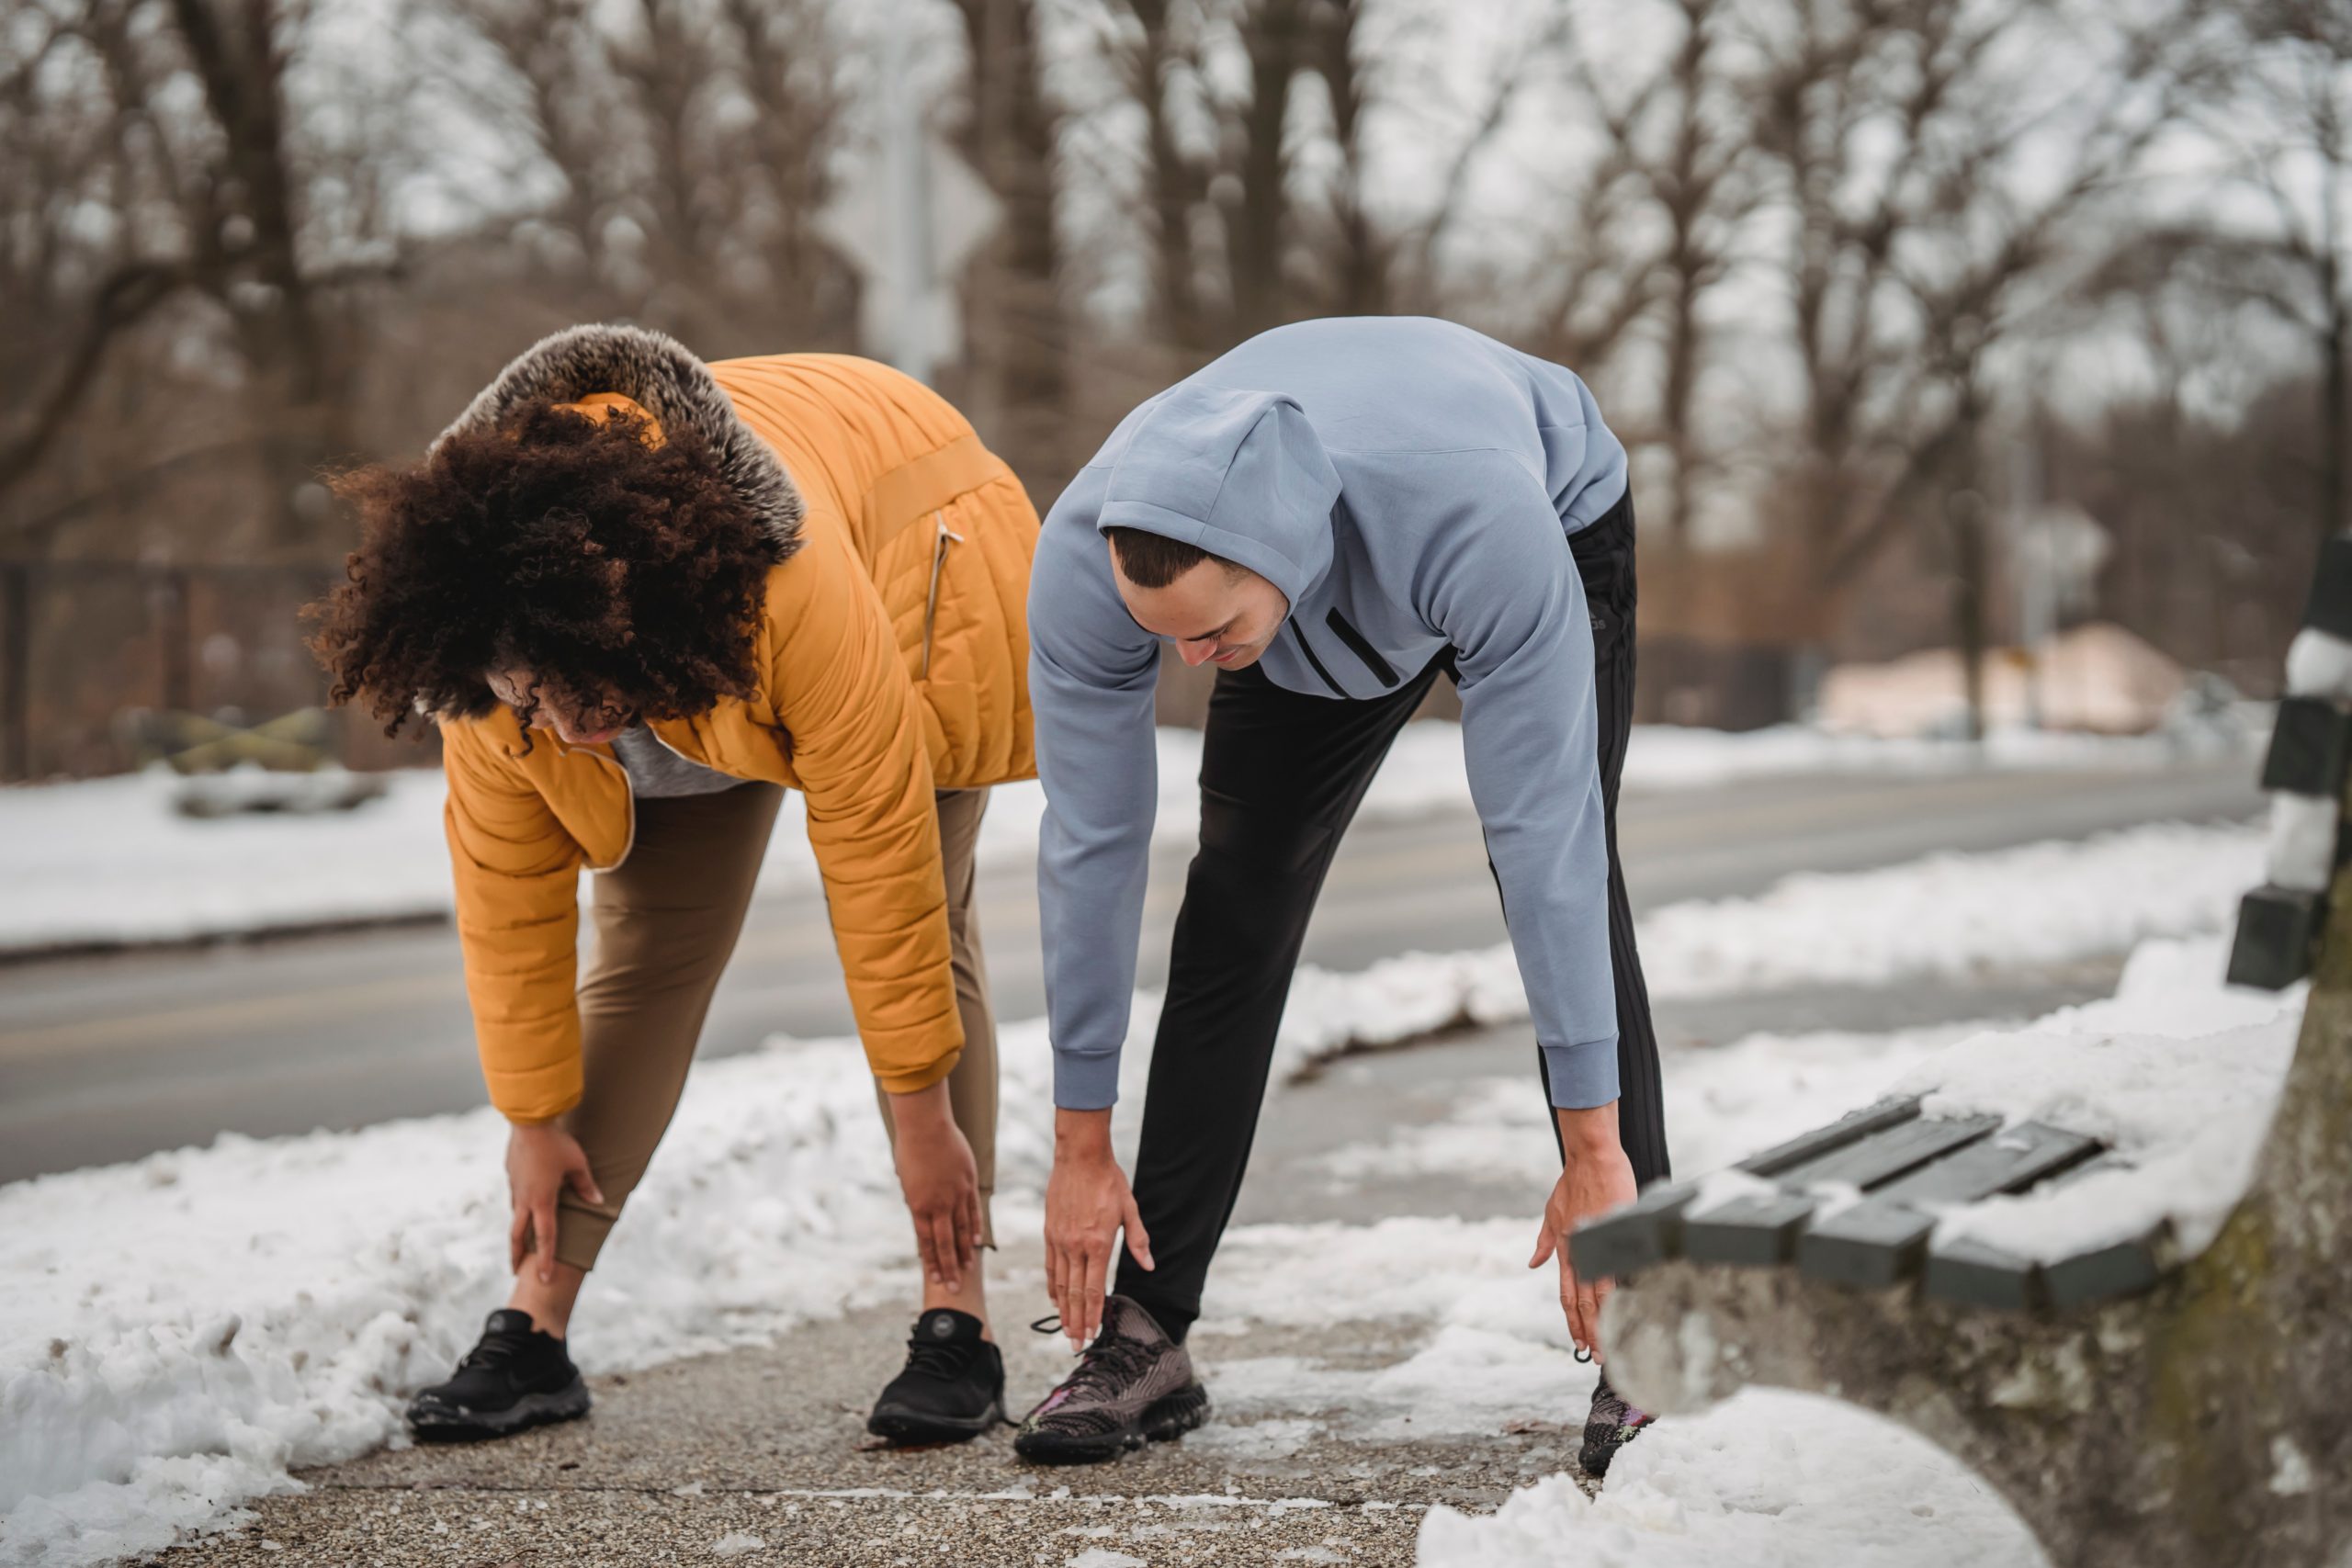 Two humans exercising outside in the winter